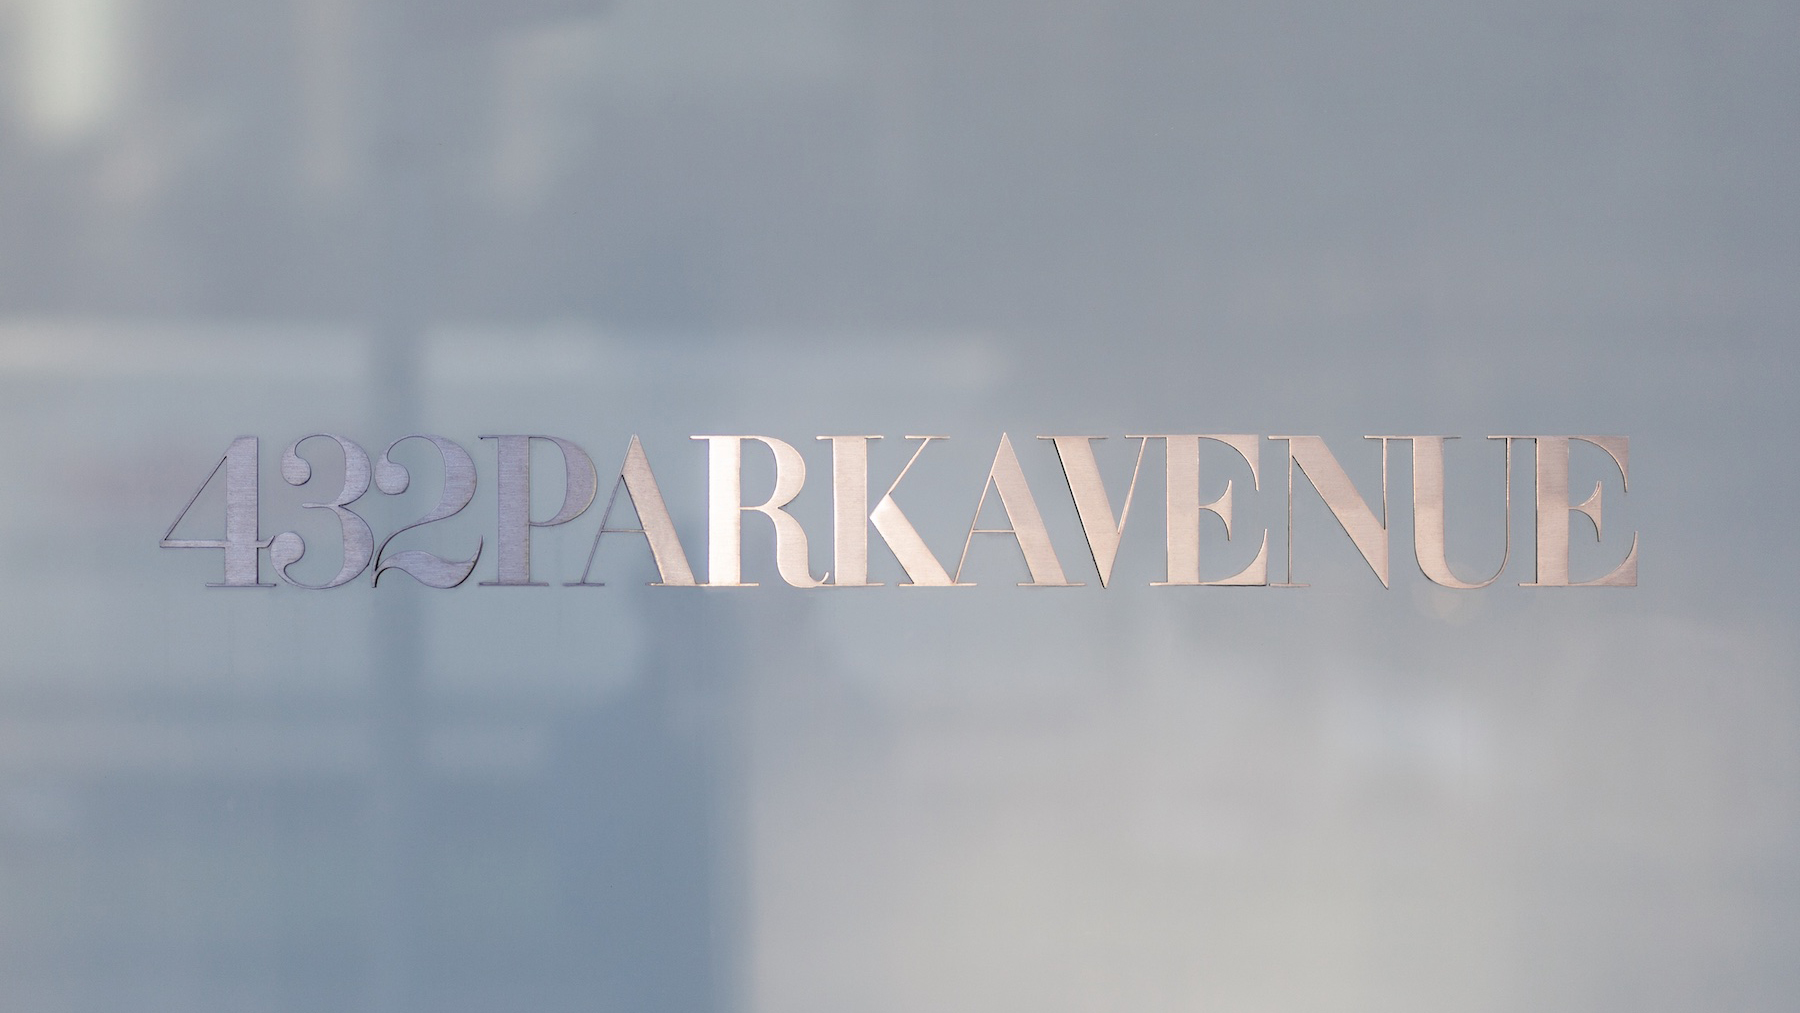 Signage for 432 Park Ave